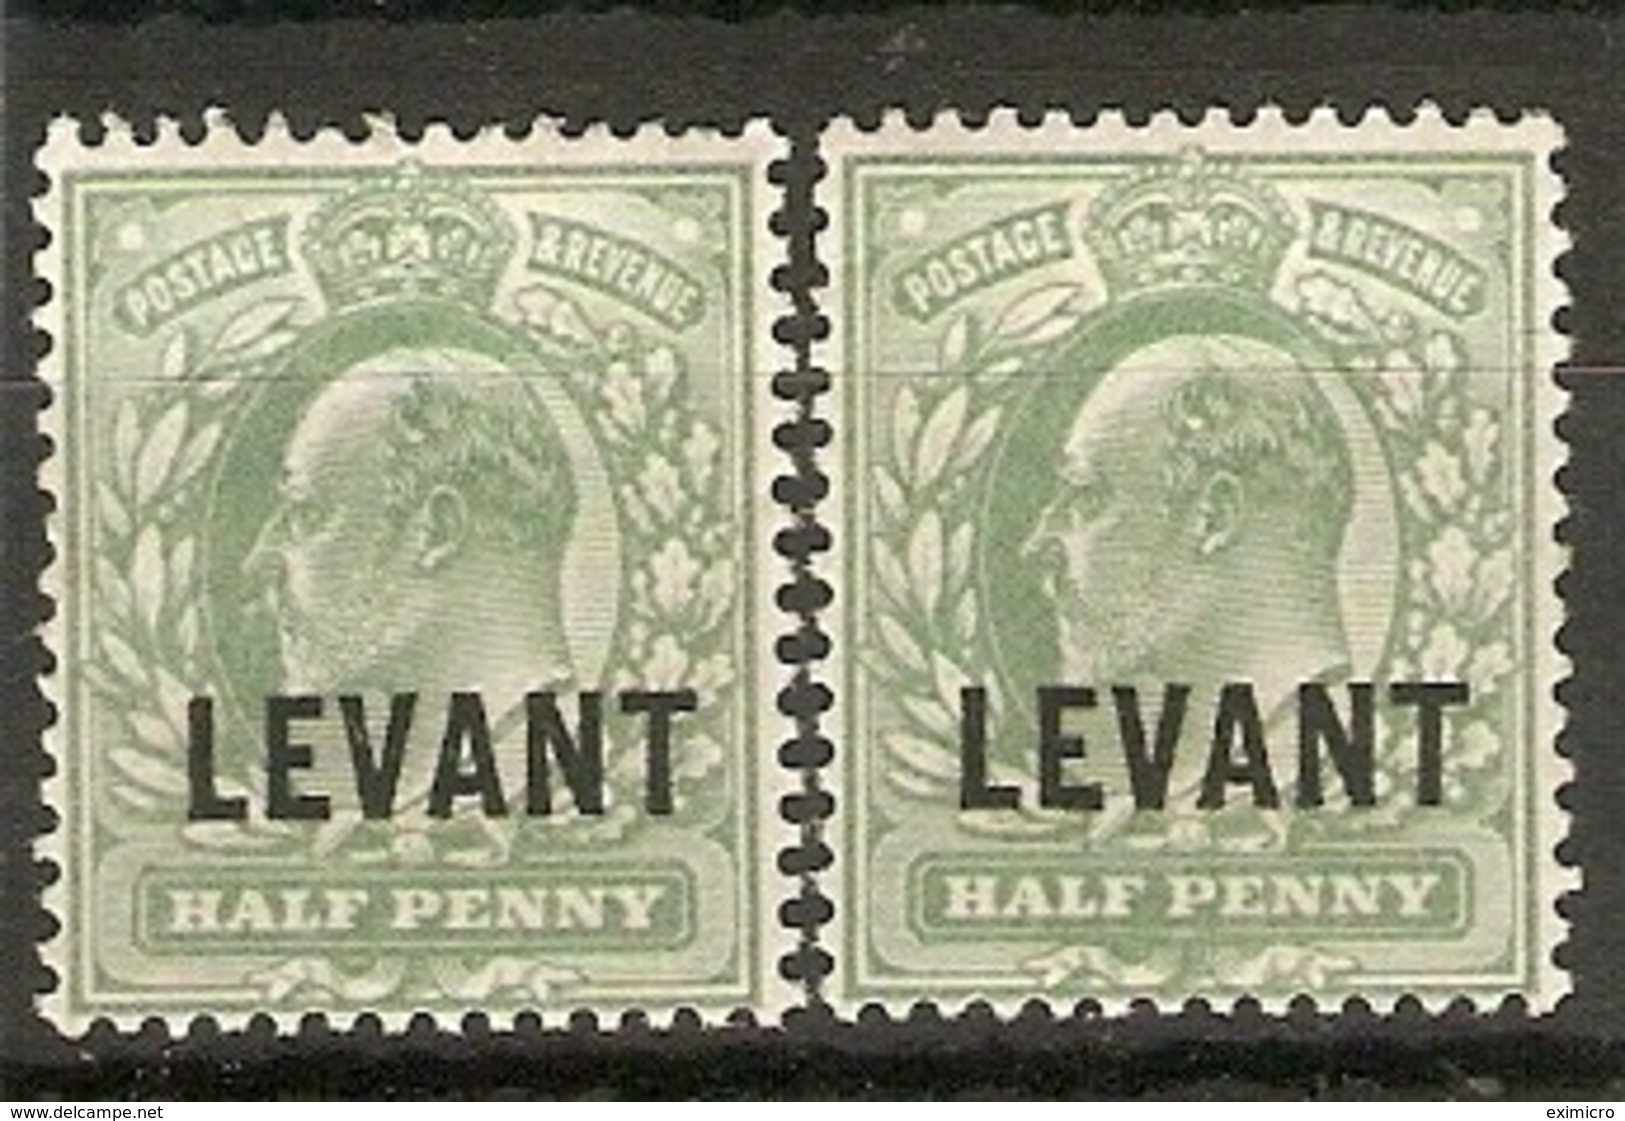 BRITISH LEVANT 1905 ½d PALE YELLOWISH GREEN AND ½d YELLOWISH GREEN SG L1/L1a MOUNTED MINT Cat £17 - British Levant